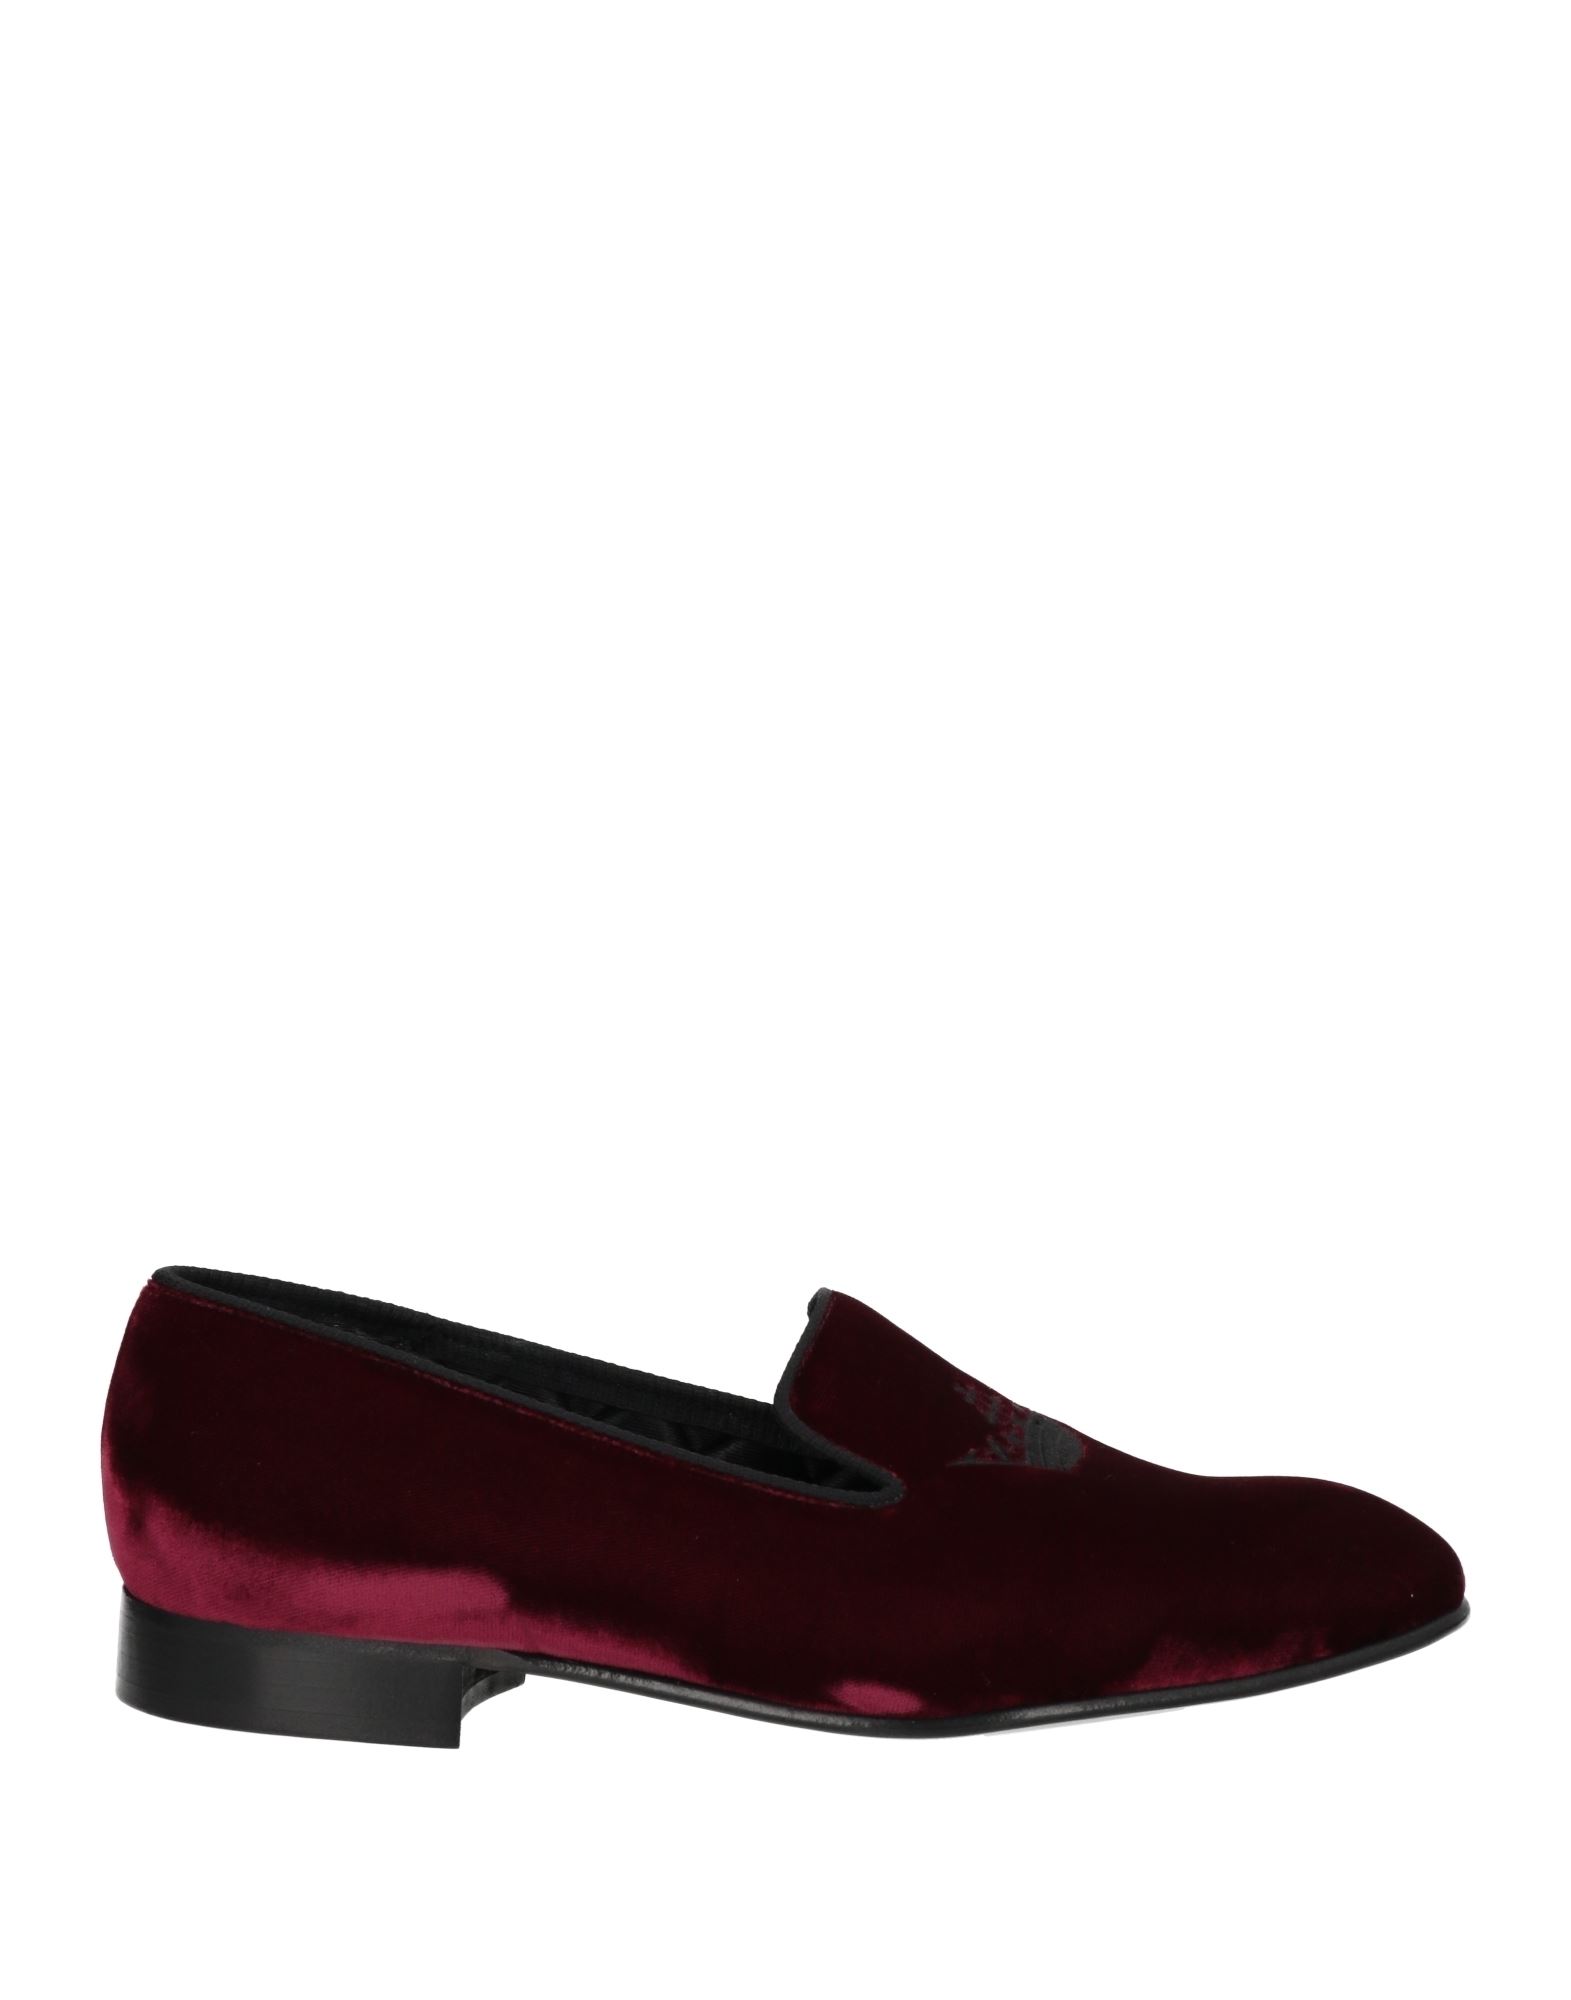 Church's Man Loafers Burgundy Size 6.5 Textile Fibers In Red